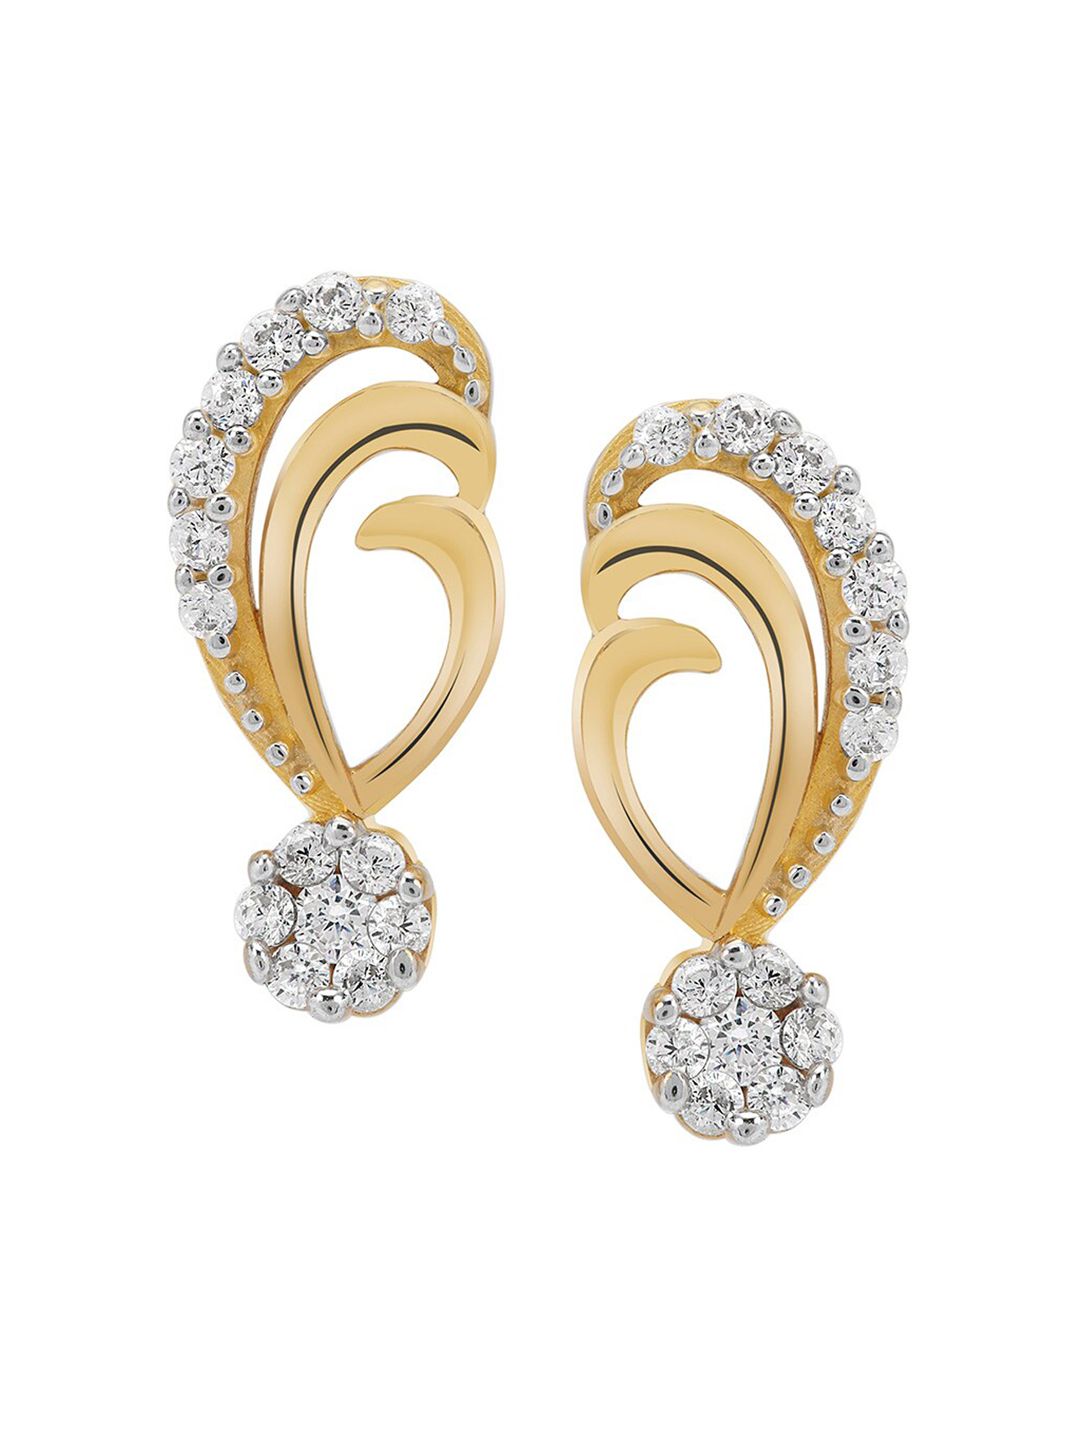 LA SOULA Gold-Plated & White 925 Sterling Silver Contemporary Drop Earrings Price in India